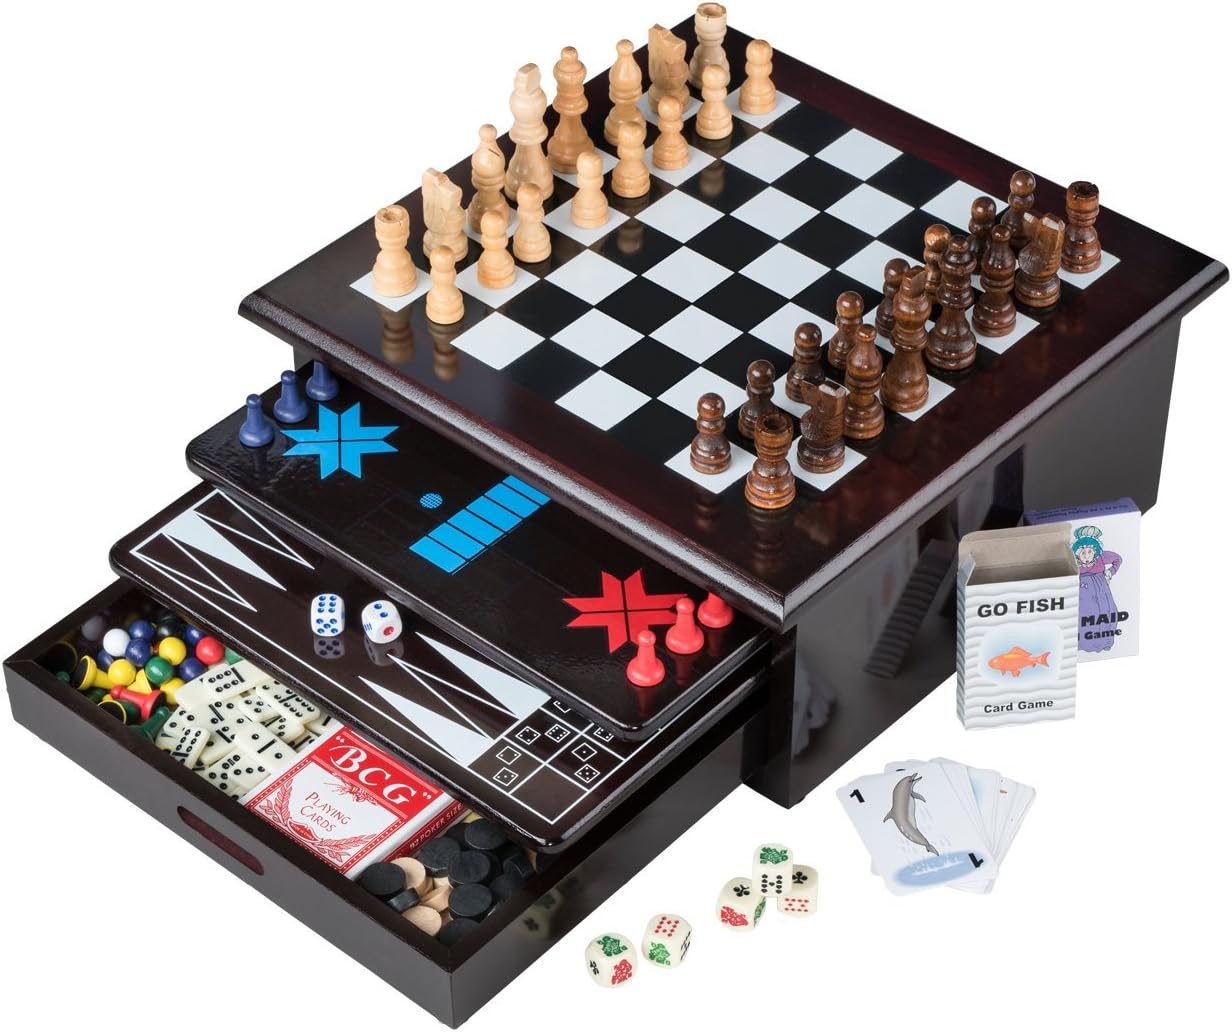 Board Game Set - Deluxe 15 in 1 Tabletop Wood-Accented Game Center with Storage Drawer (Checkers, Chess, Chinese Checkers, Parcheesi, Tictactoe, Solitaire, Snakes and Ladders, Mancala, Backgammon, Poker Dice, Playing Cards, Go Fish, Old Maid, and Dominos)